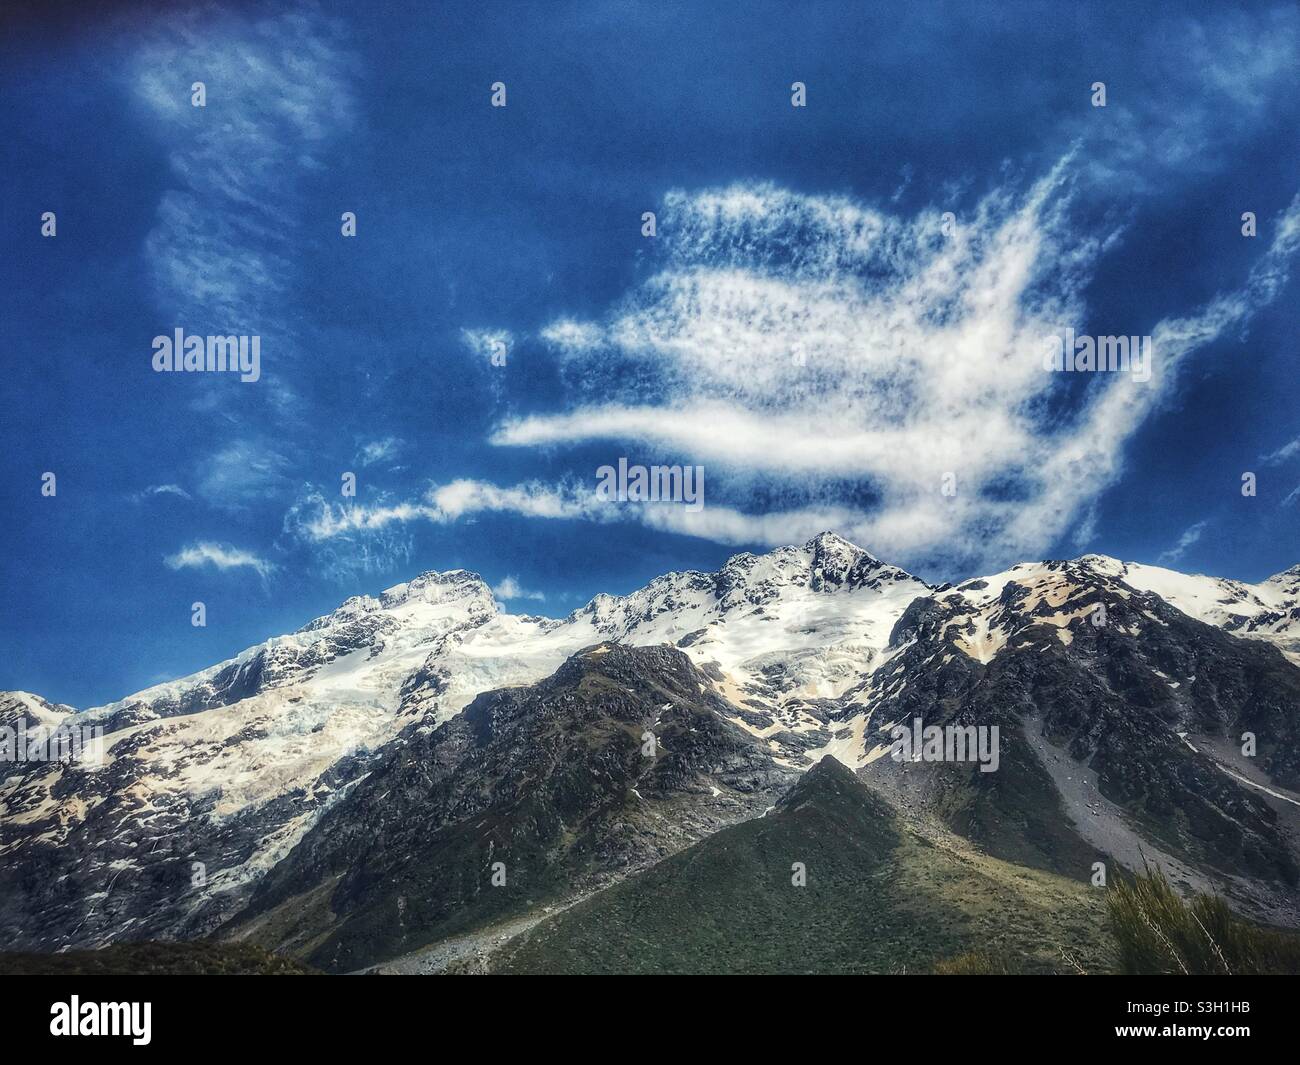 Clouds over a snowy peak in the Aoraki Mount Cook National Park, Canterbury region, South Island, New Zealand Stock Photo